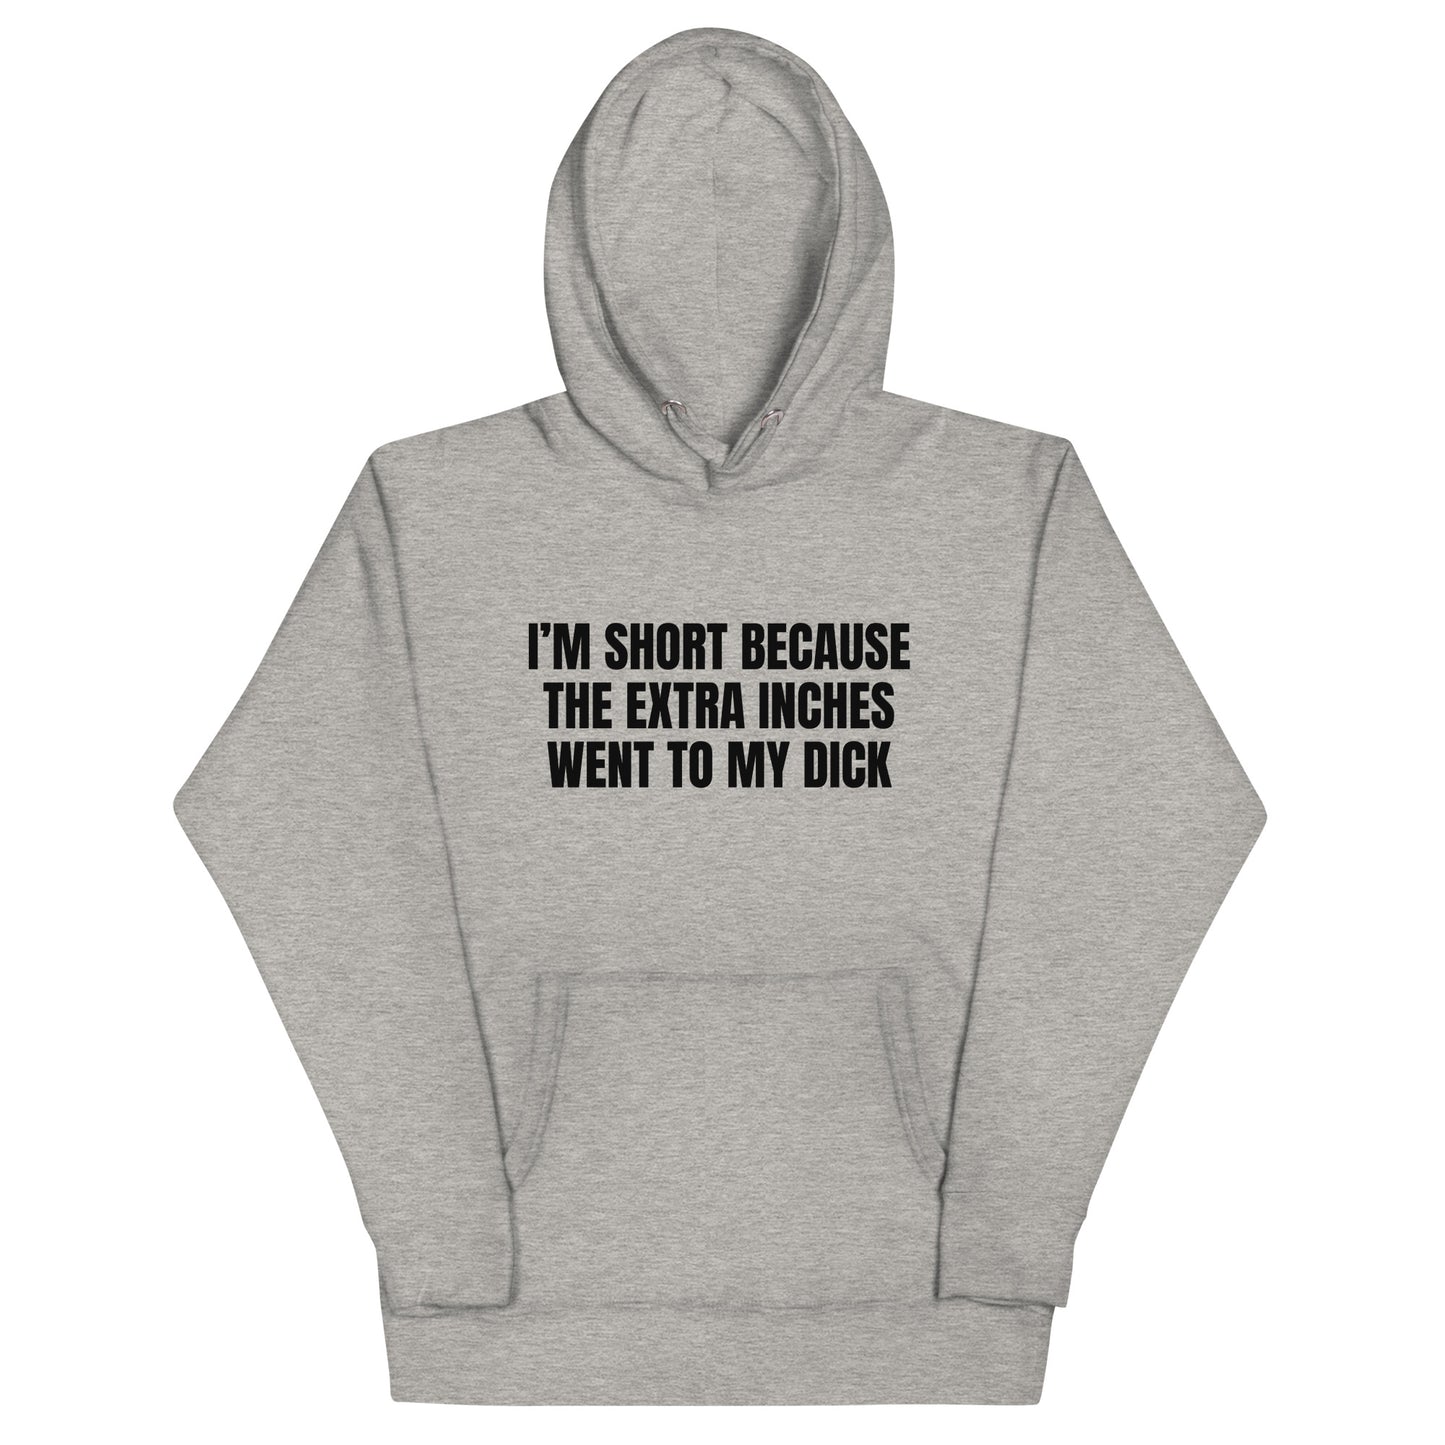 I'm Short Because the Extra Inches Went to My Dick Unisex Hoodie